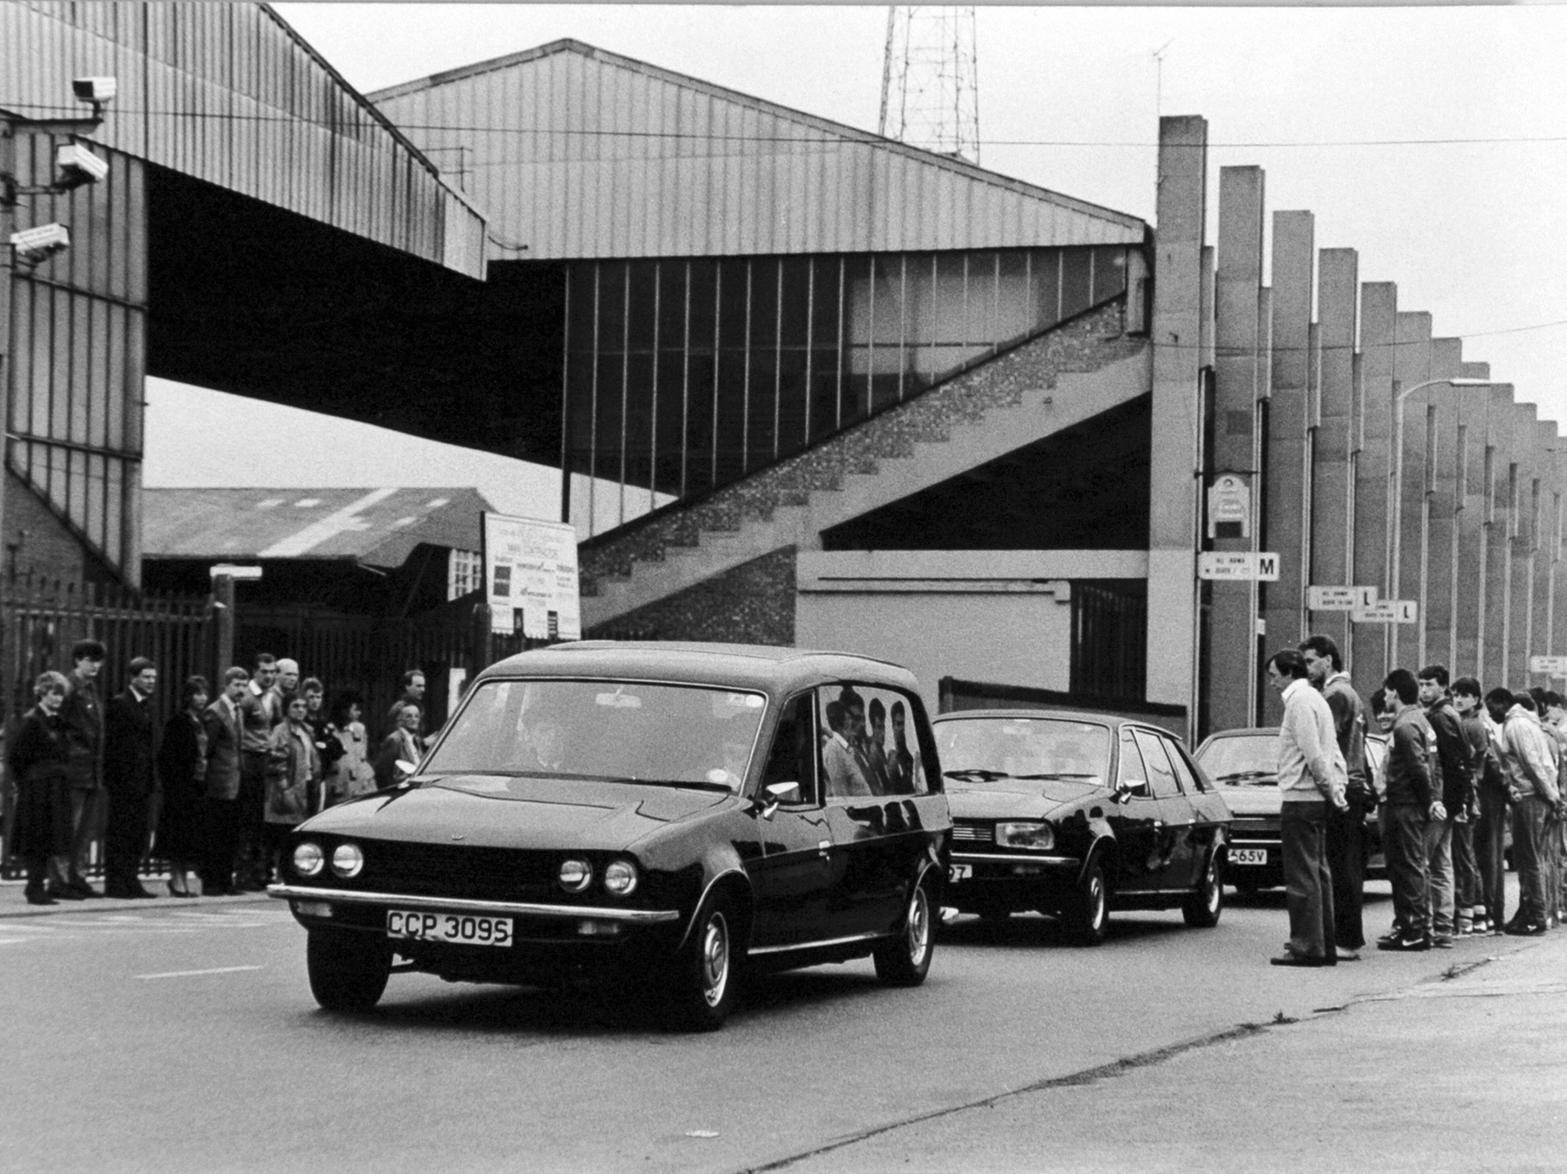 The funeral procession for Leeds United chairman Manny Cussins travels along Elland Road.